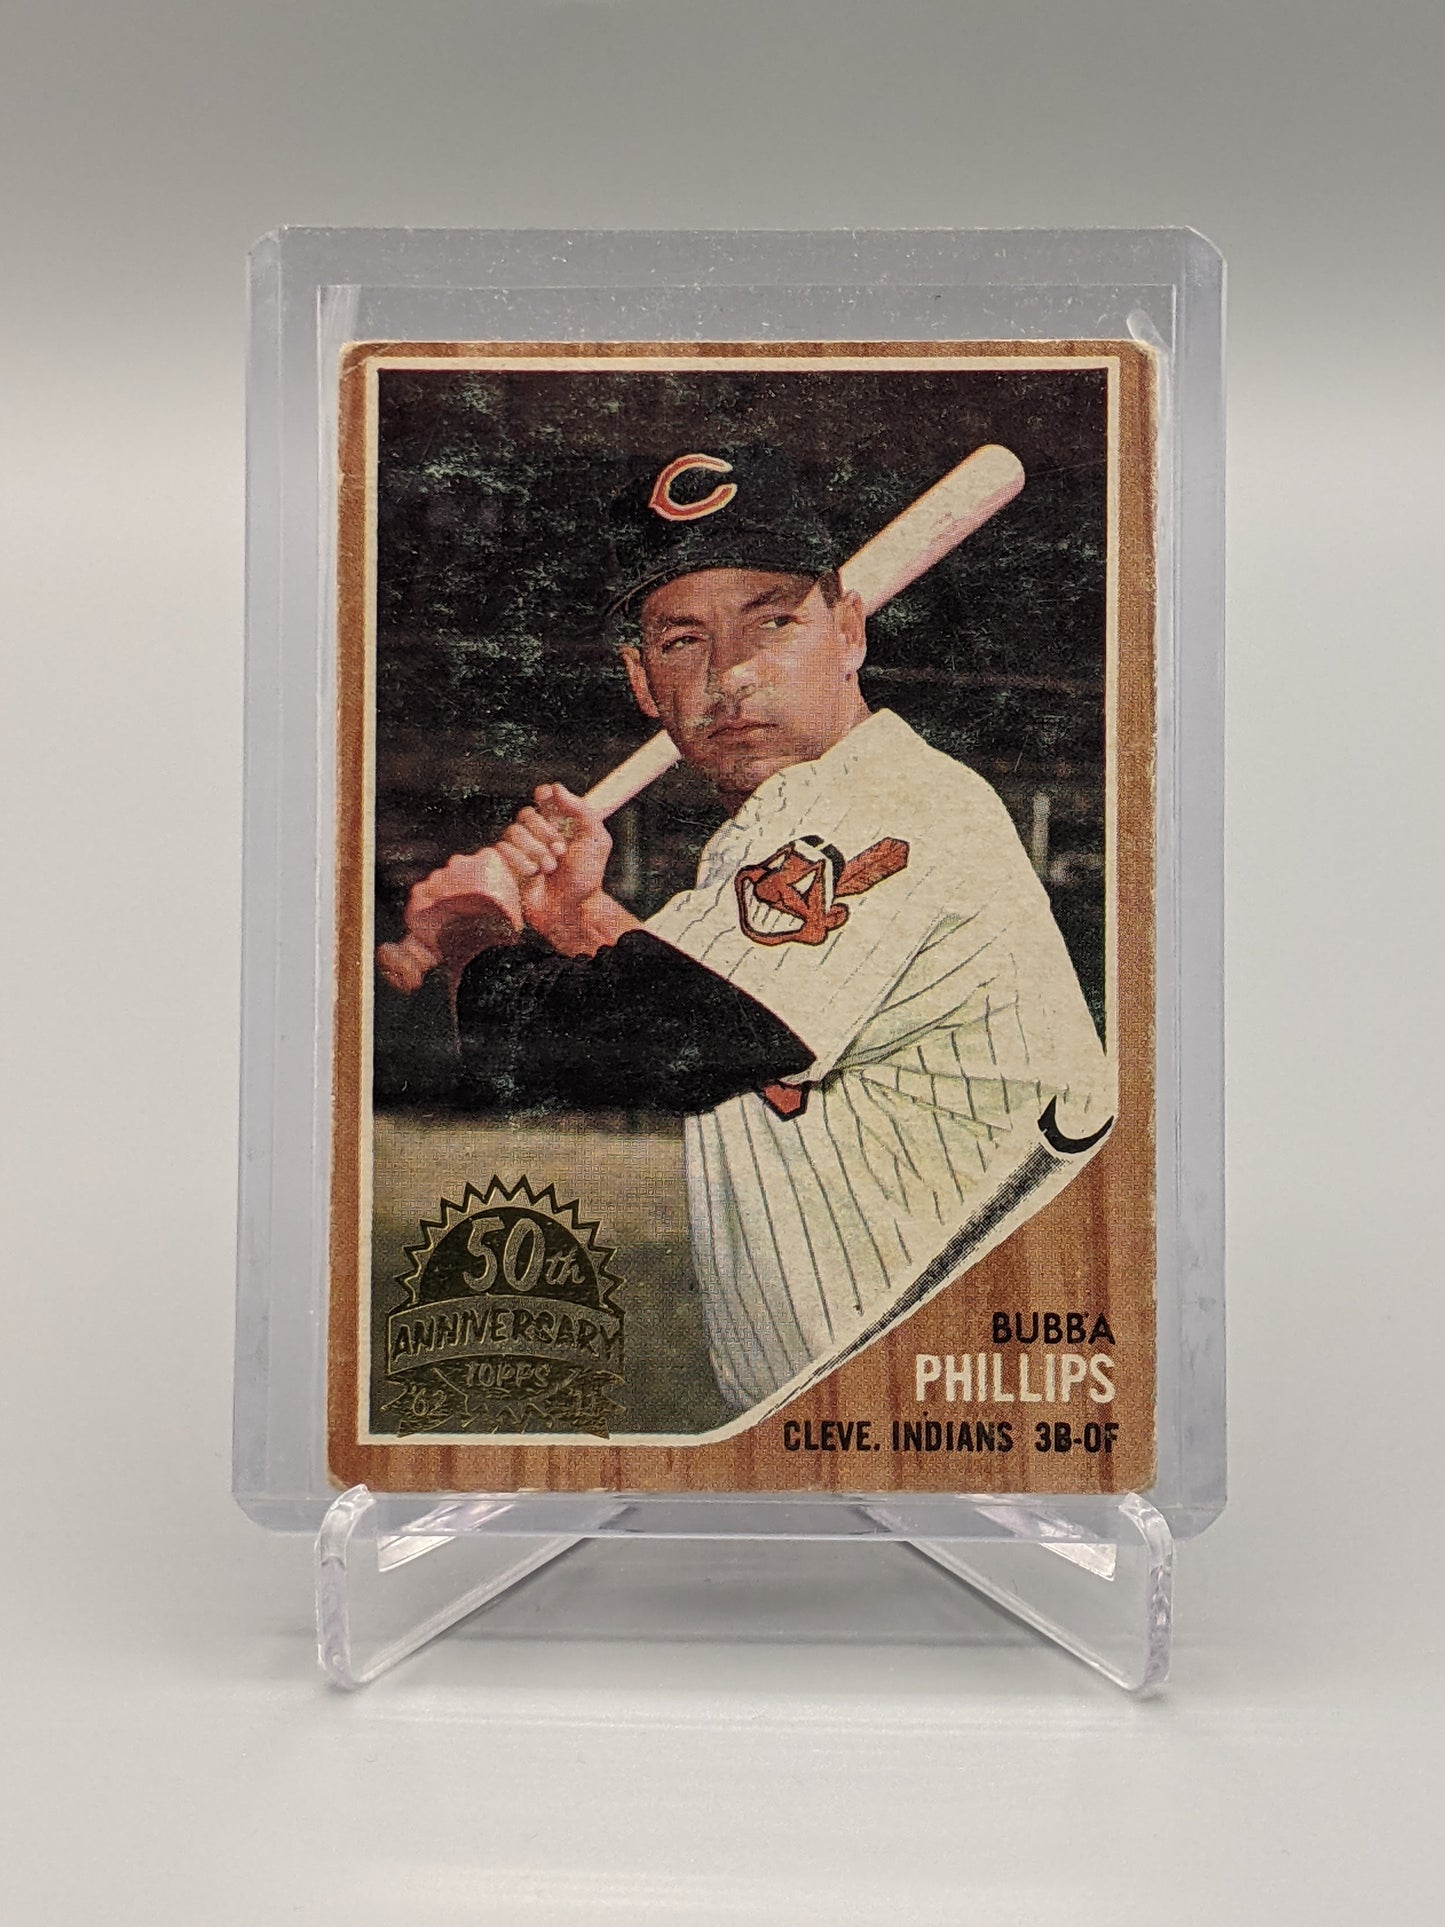 2011 Topps Heritage 50th 1962 Buyback #511 Bubba Phillips